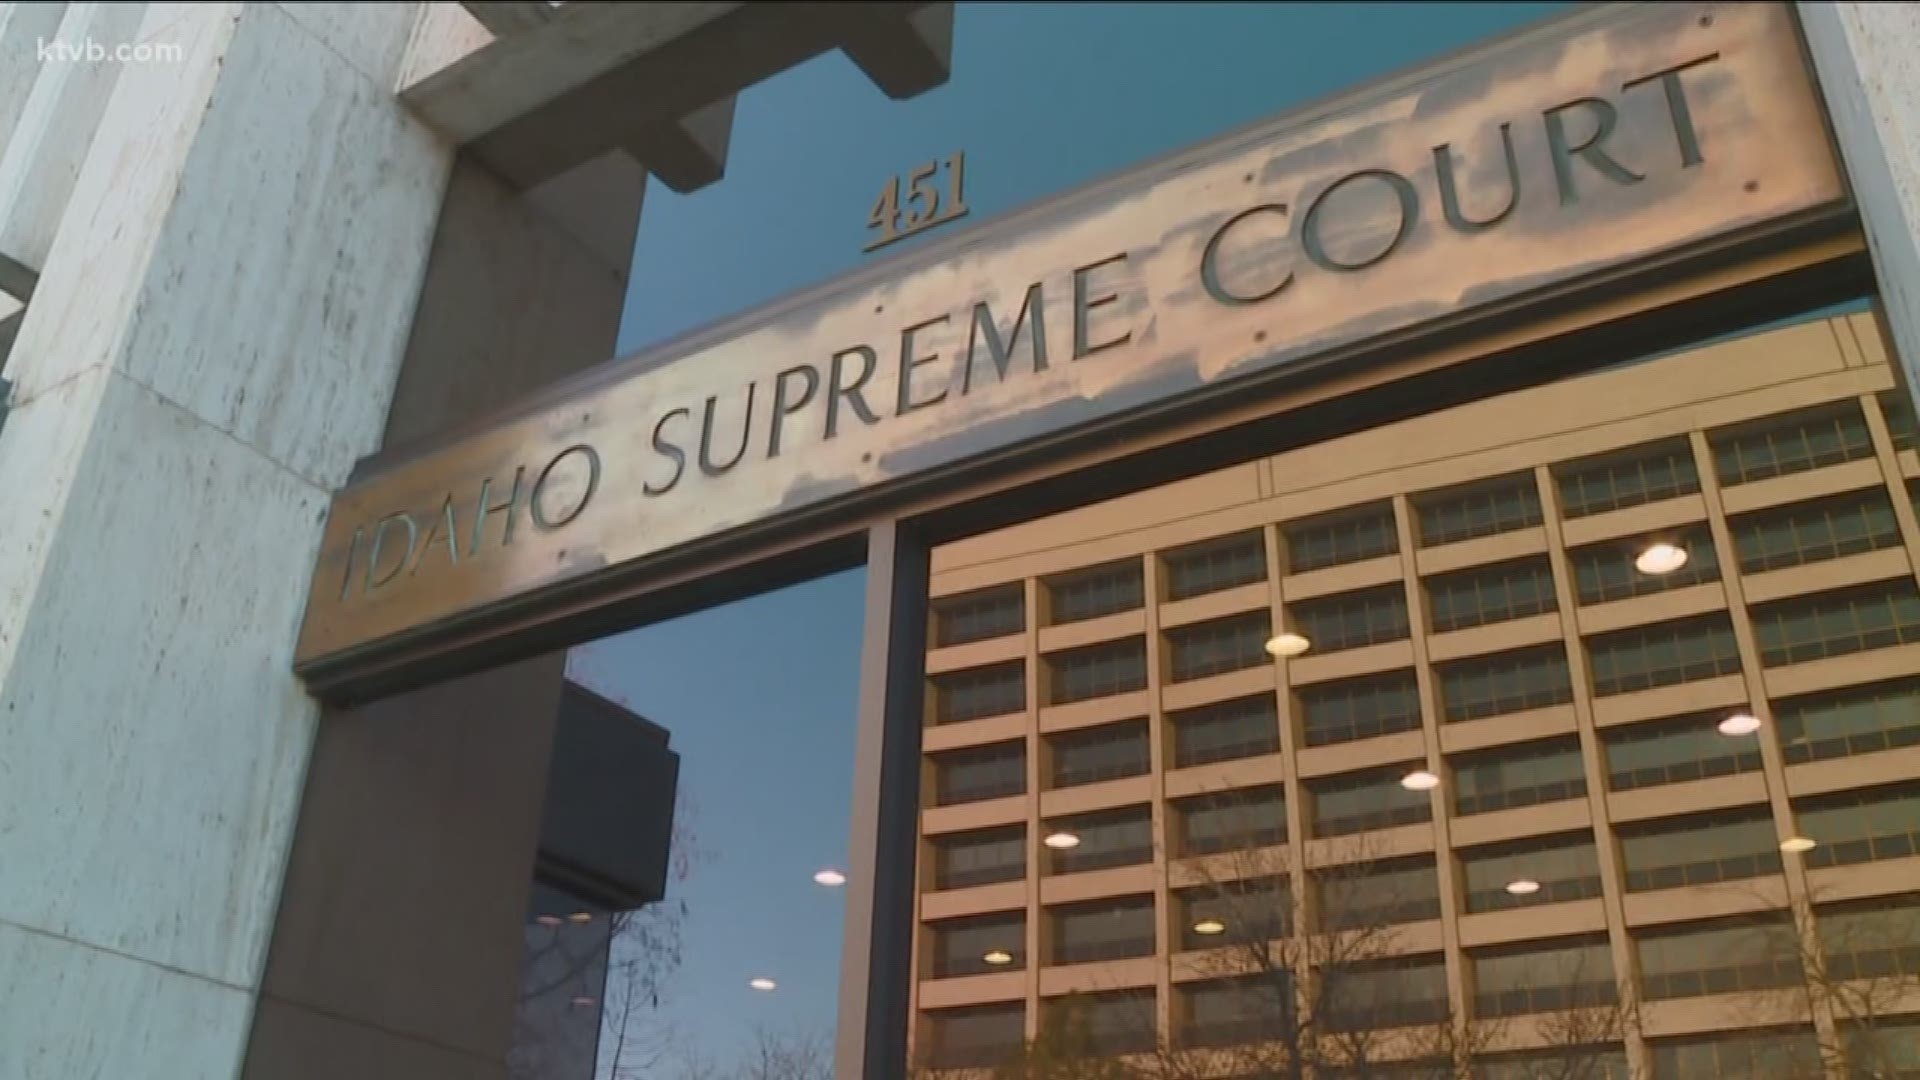 The Idaho Supreme Court on Tuesday will hear a lawsuit brought on by Idaho Freedom Foundation challenging the constitutionality of voter-approved Medicaid expansion.